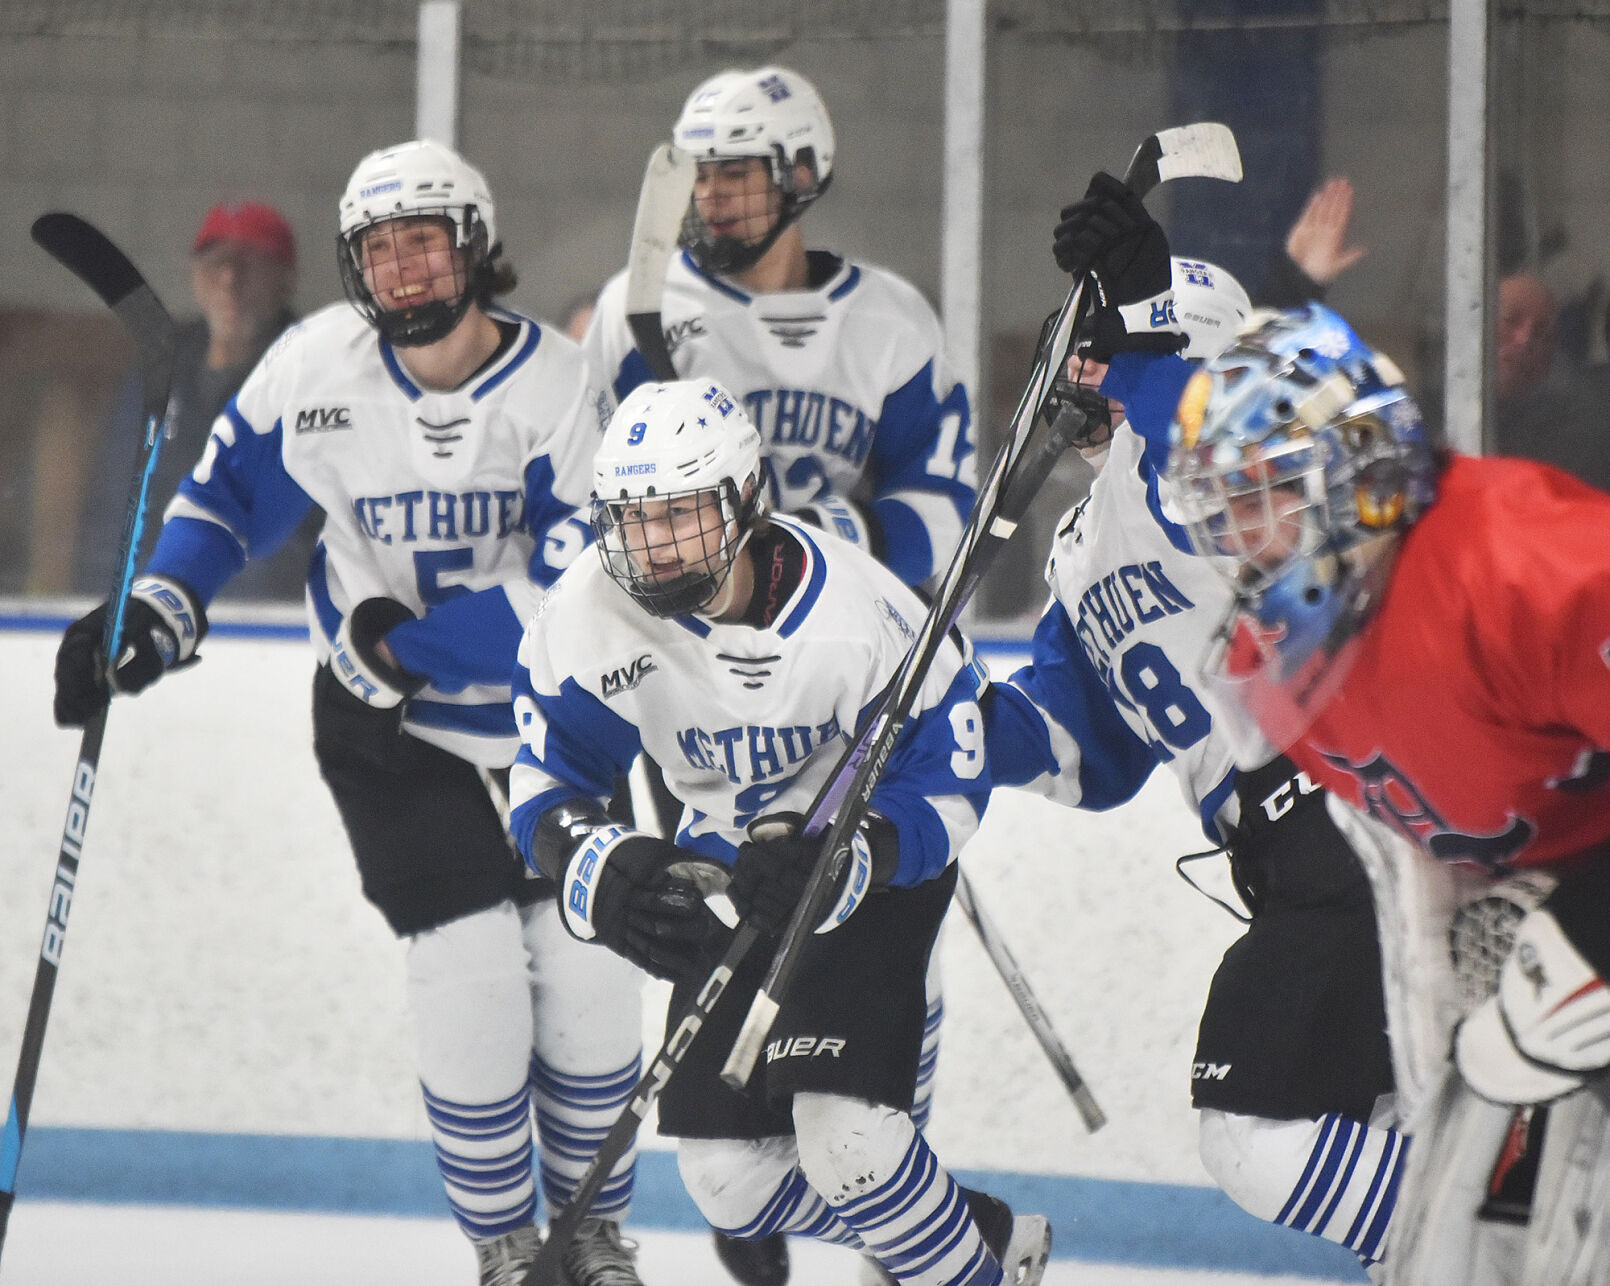 Quinn Ronan Hat Trick Leads Methuen Rangers to Round of 16 Victory